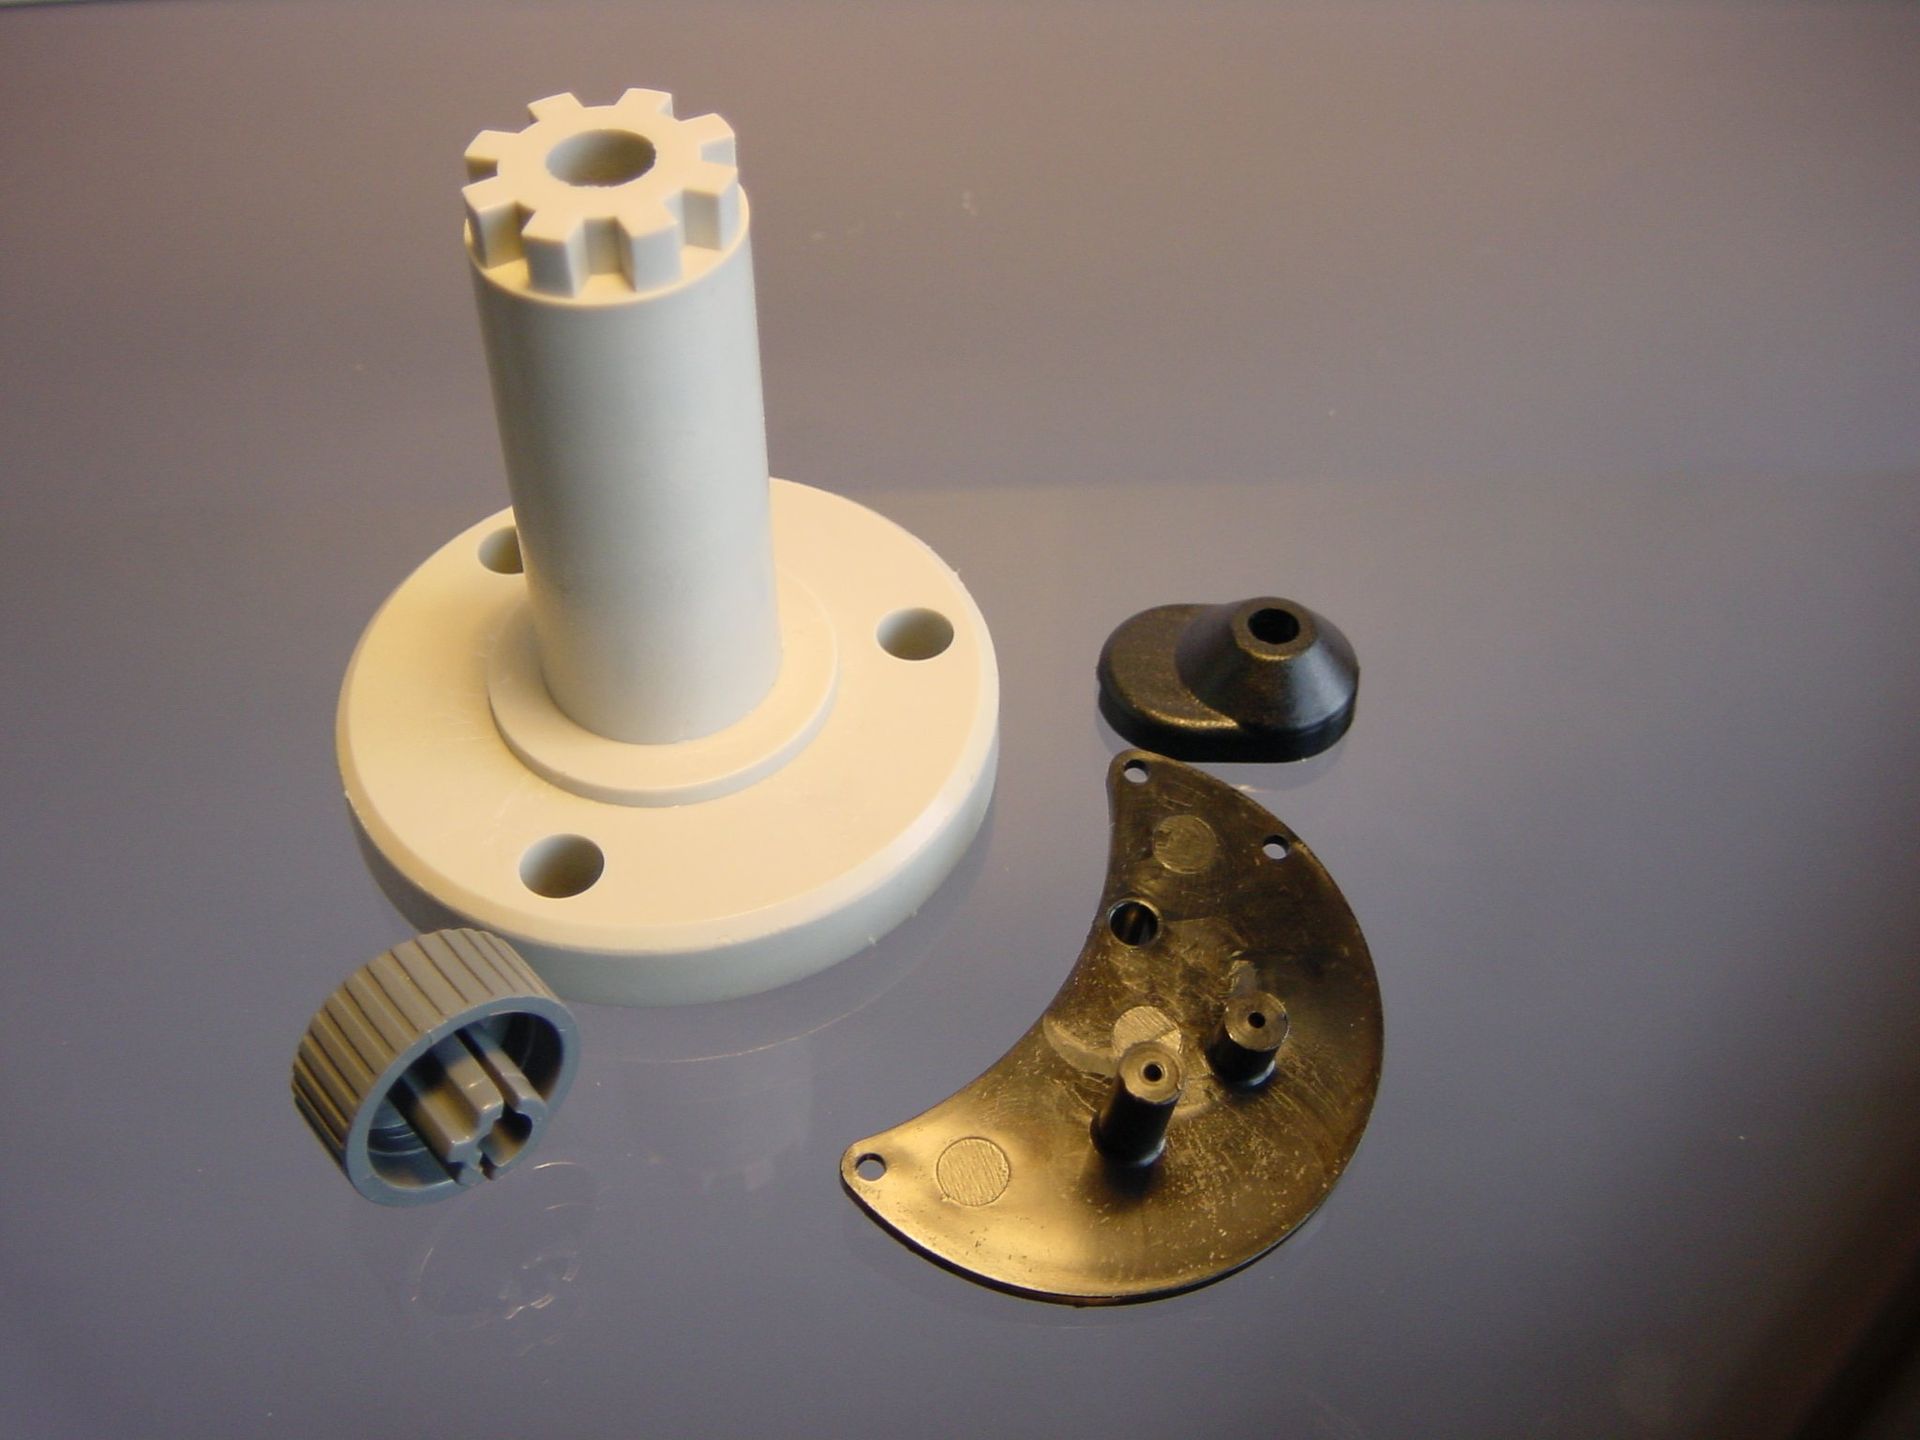 A white cylinder with a gear on top of it